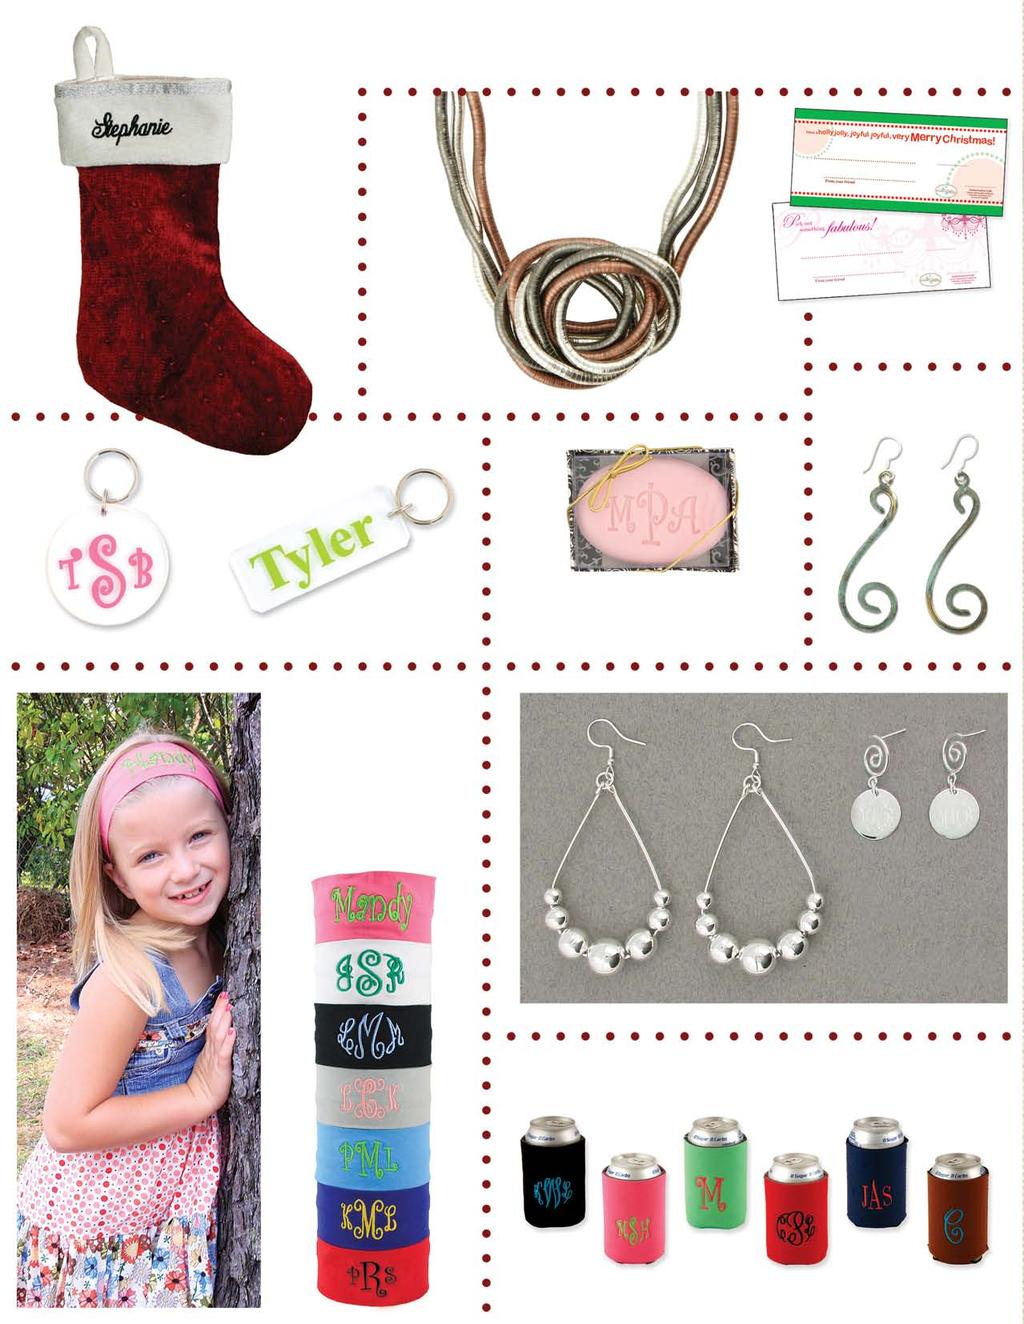 Stocking Stuffers Under $18 GG0060 $28 Satin Lined Red Velvet Christmas Stocking JN0399-(specify color) $16 Sculpture to Wear Necklaces -0100 silvertone -0300 hematite -0500 chocolate Not sure what